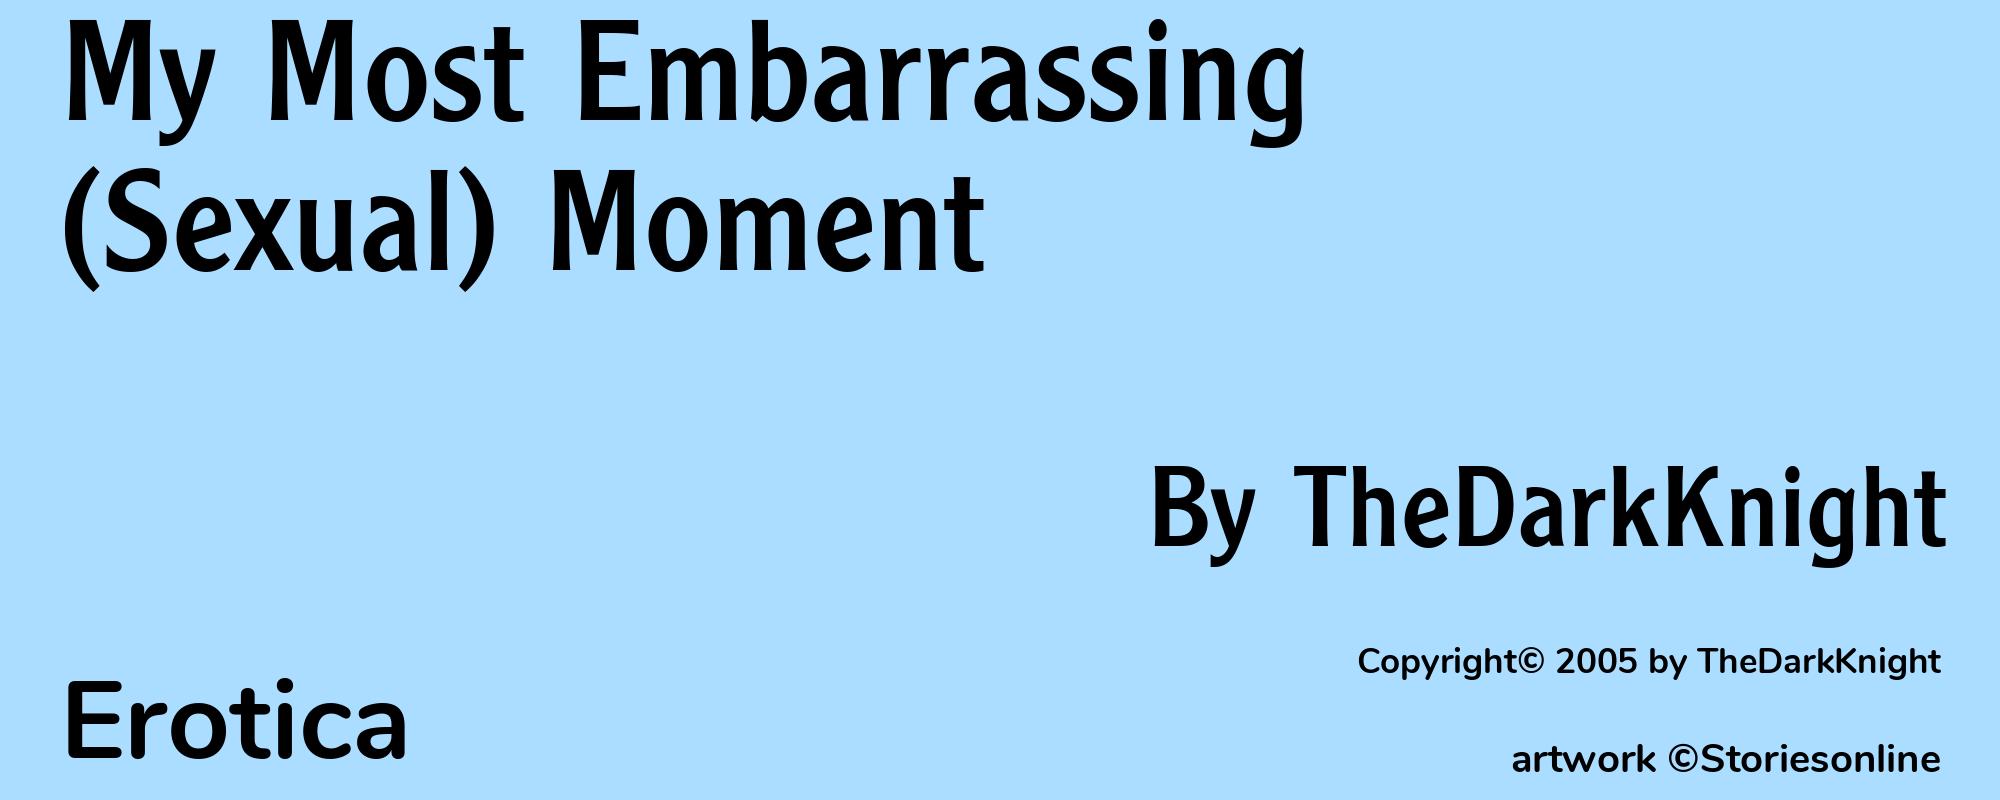 My Most Embarrassing (Sexual) Moment - Cover